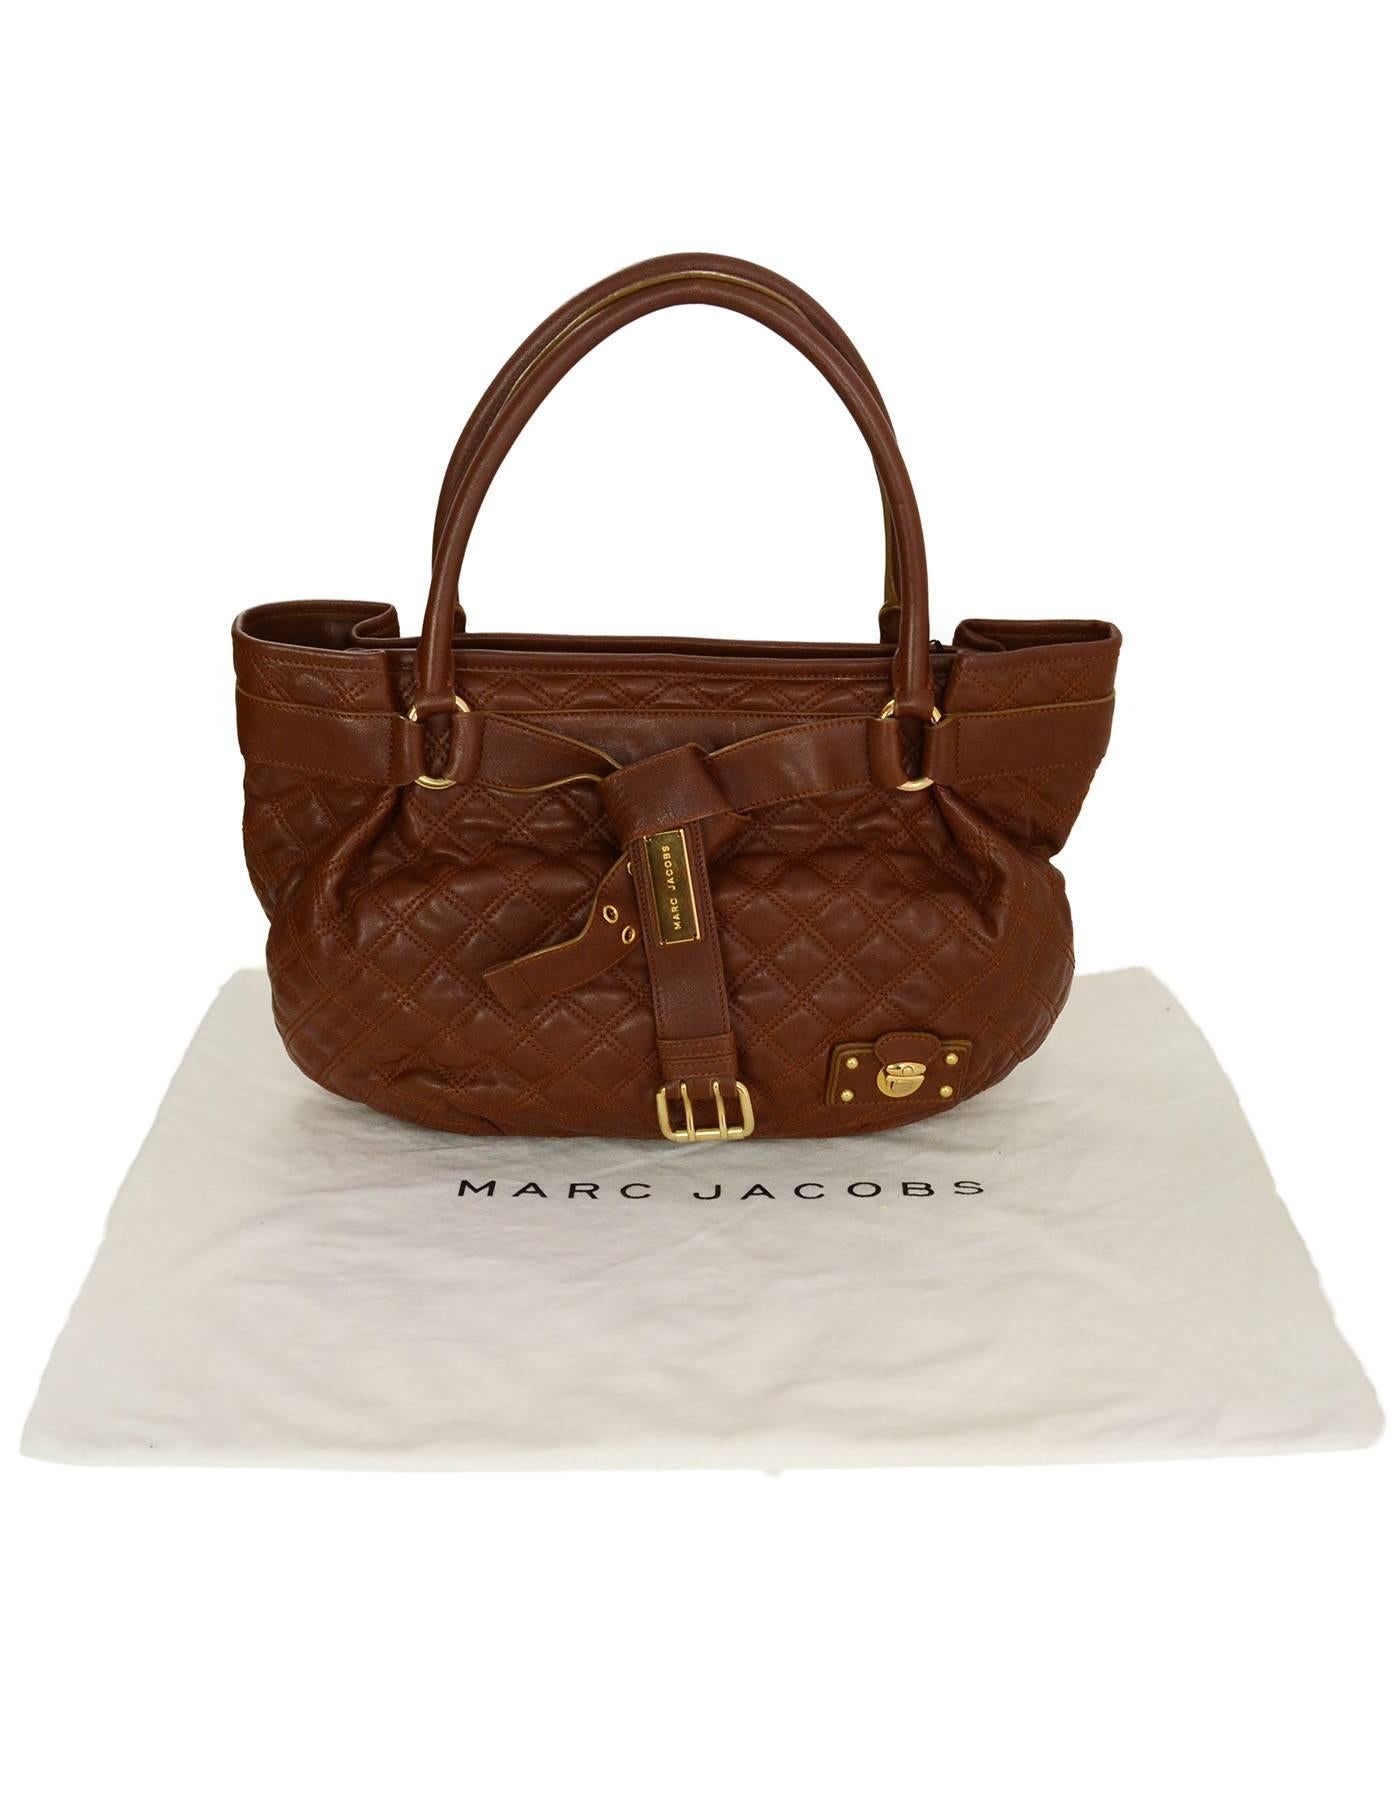 Marc Jacobs Brown Quilted Leather Tote Bag GHW 5